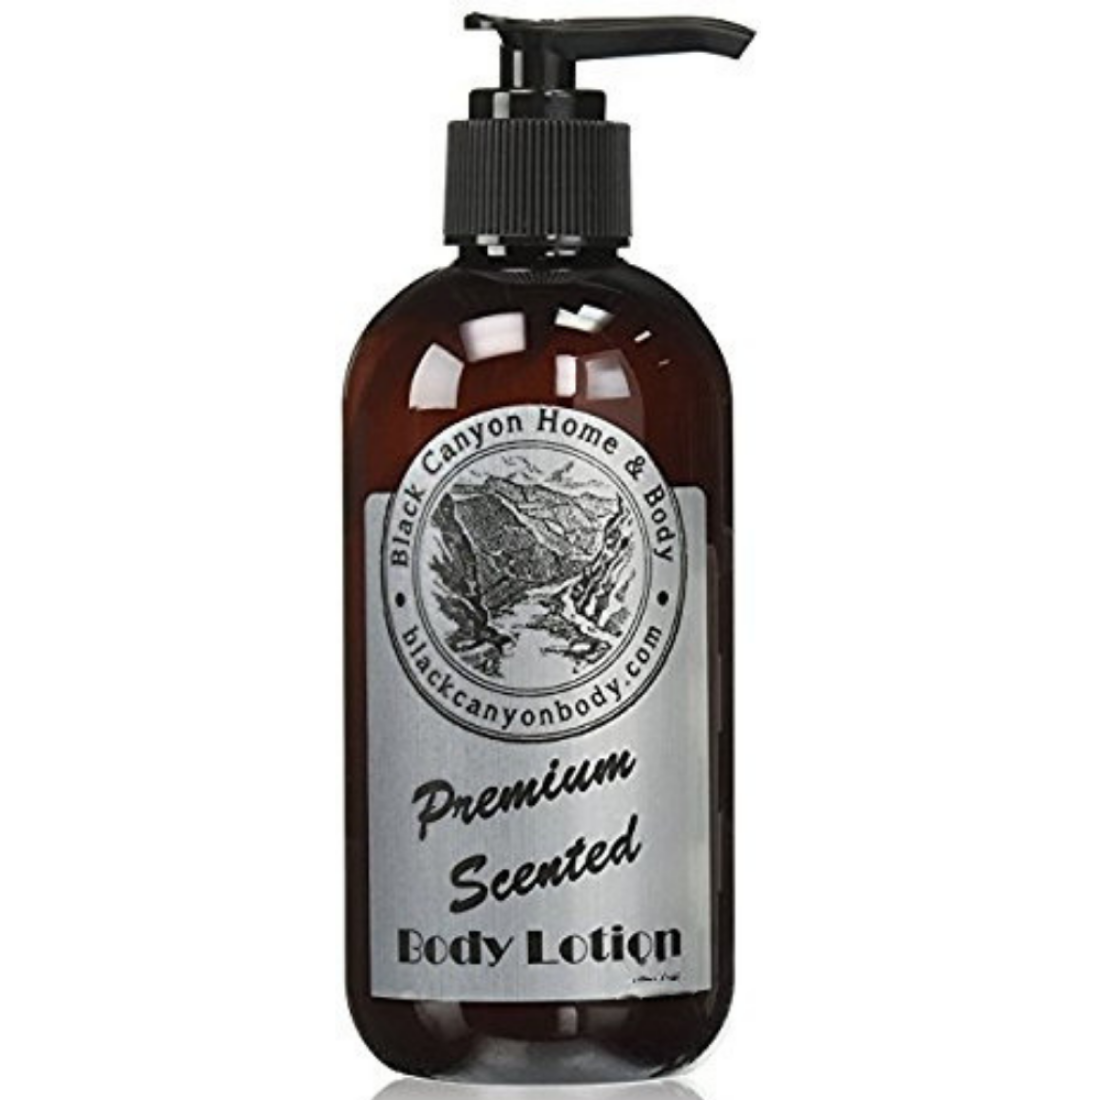 Black Canyon Apple & Blackberry Rose Scented Luxury Body Lotion with Lanolin and Jojoba Oil